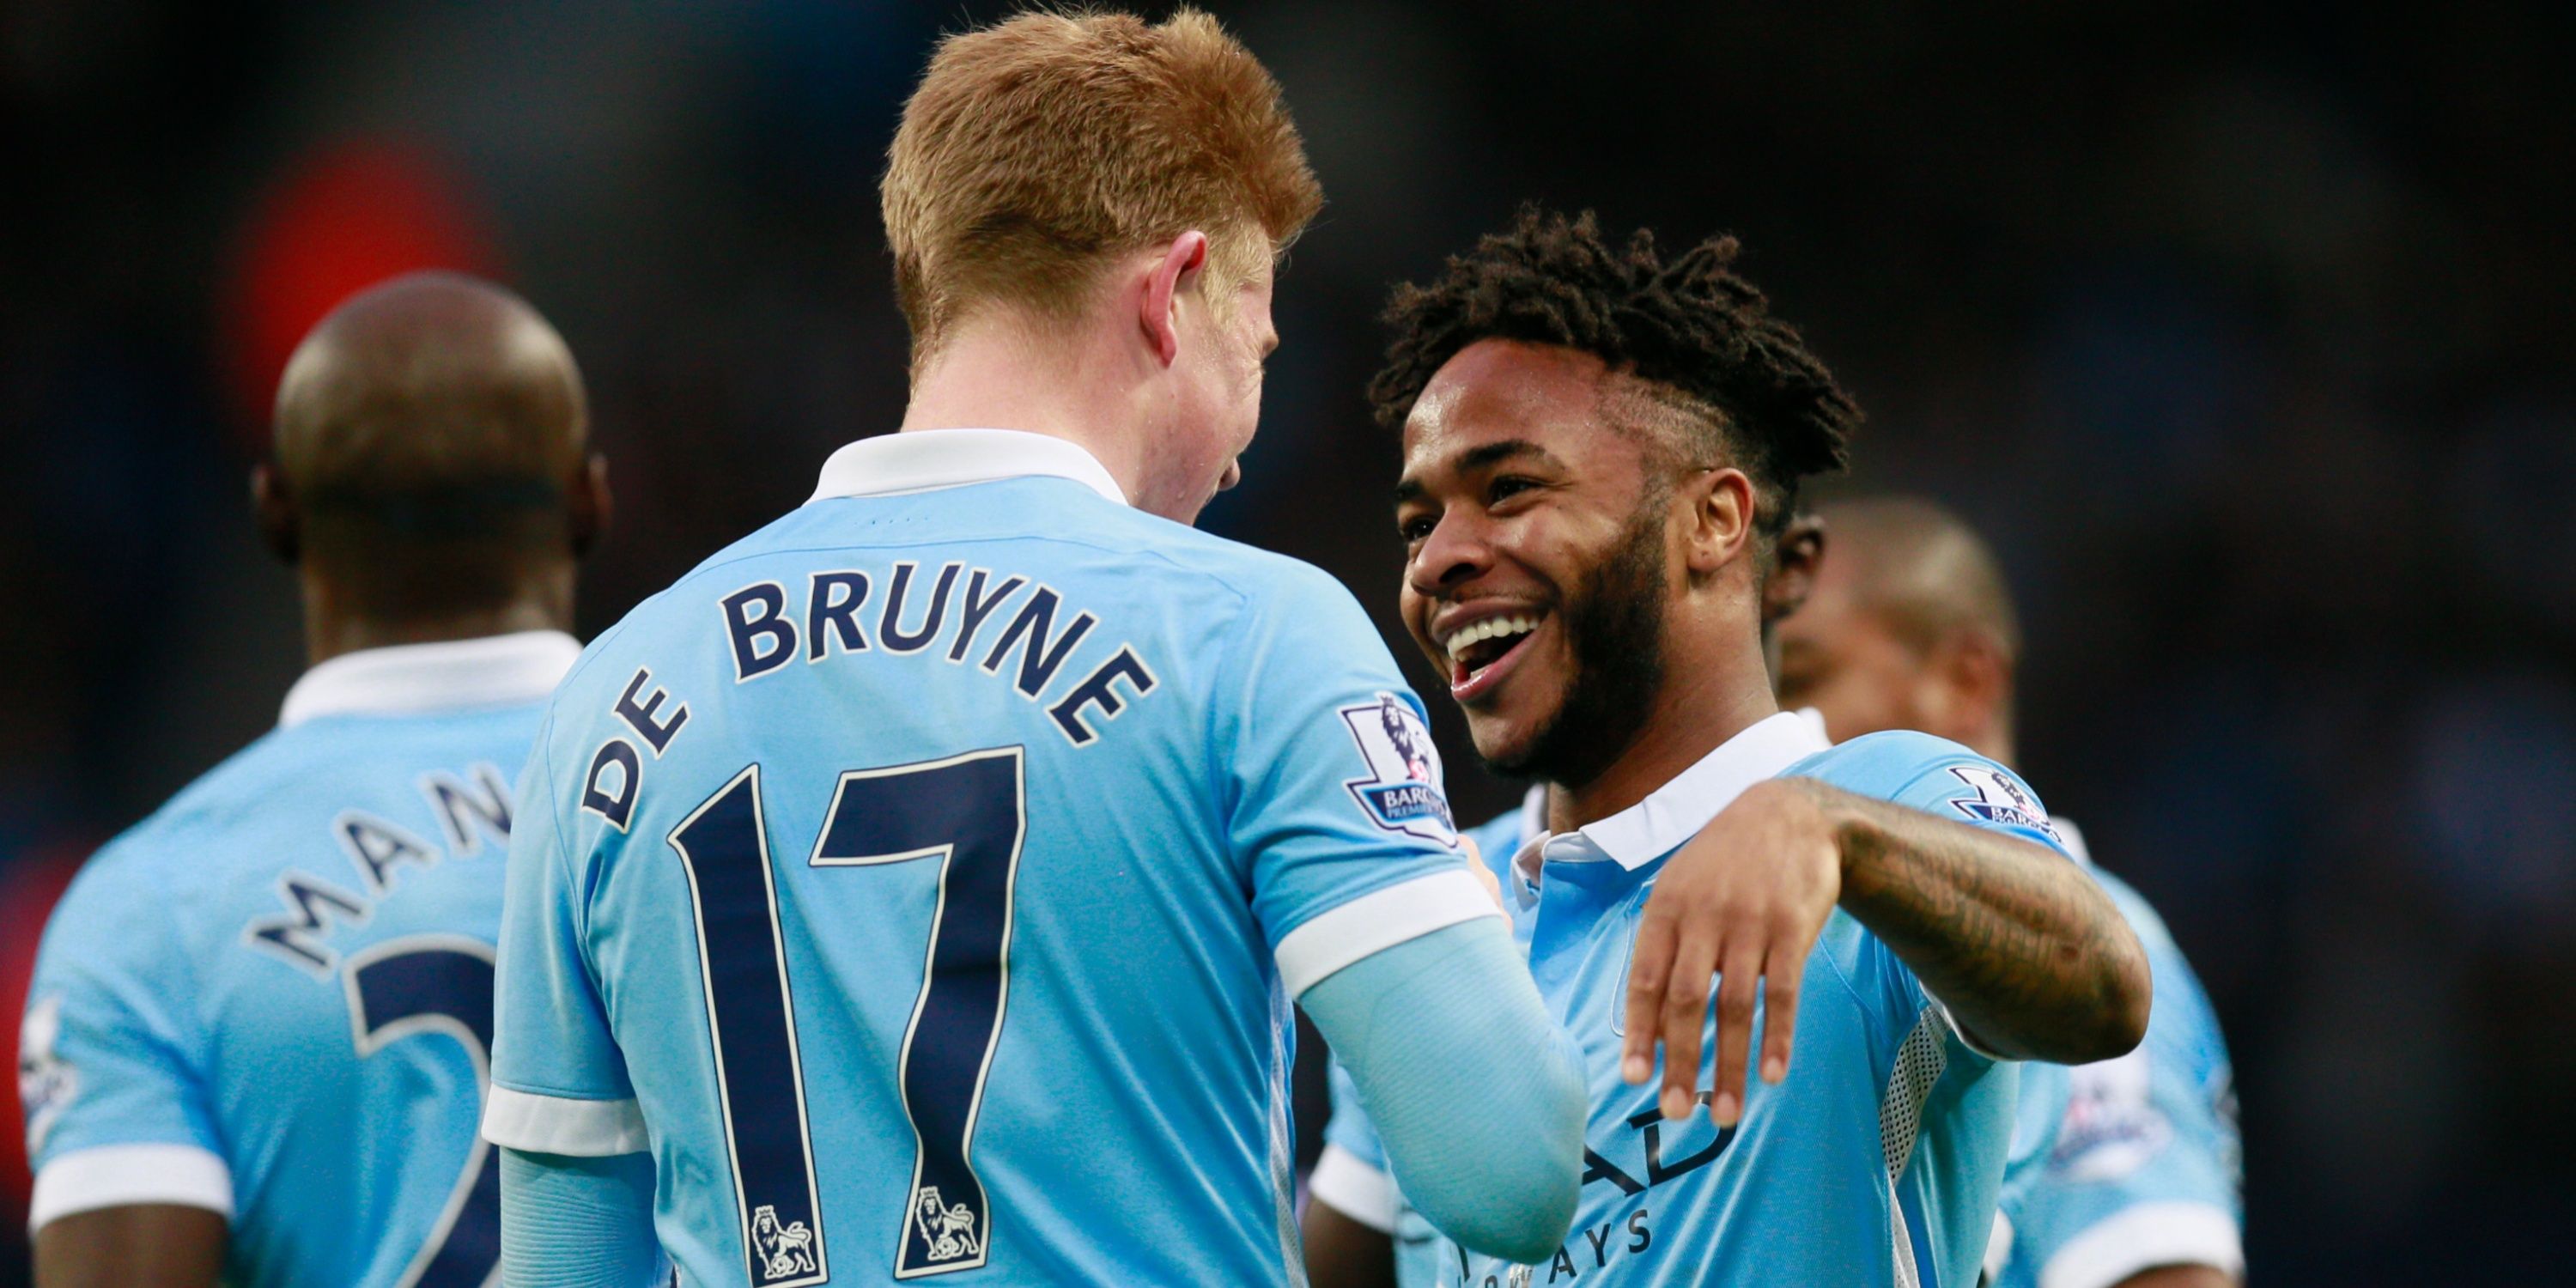 Manchester City pair Kevin de Bruyne and Raheem Sterling congratulate each other after a goal. 